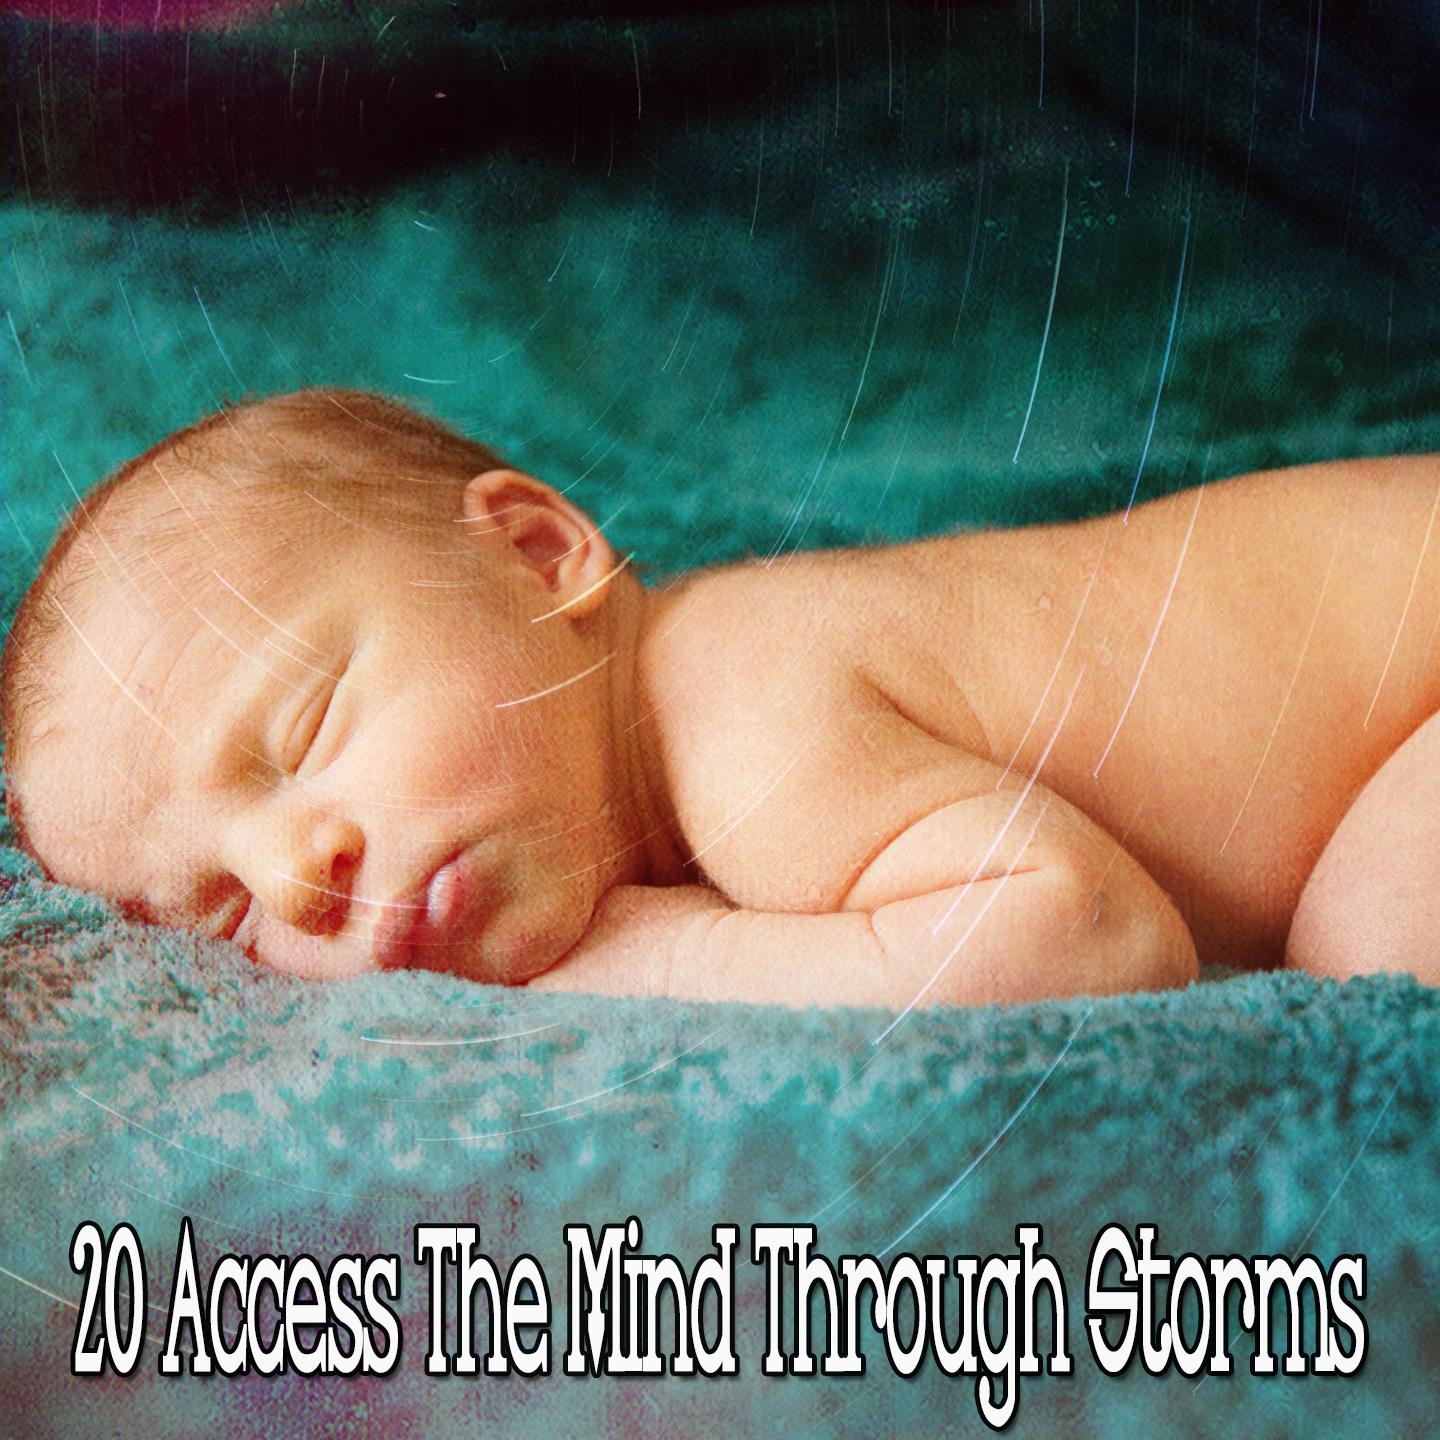 20 Access the Mind Through Storms